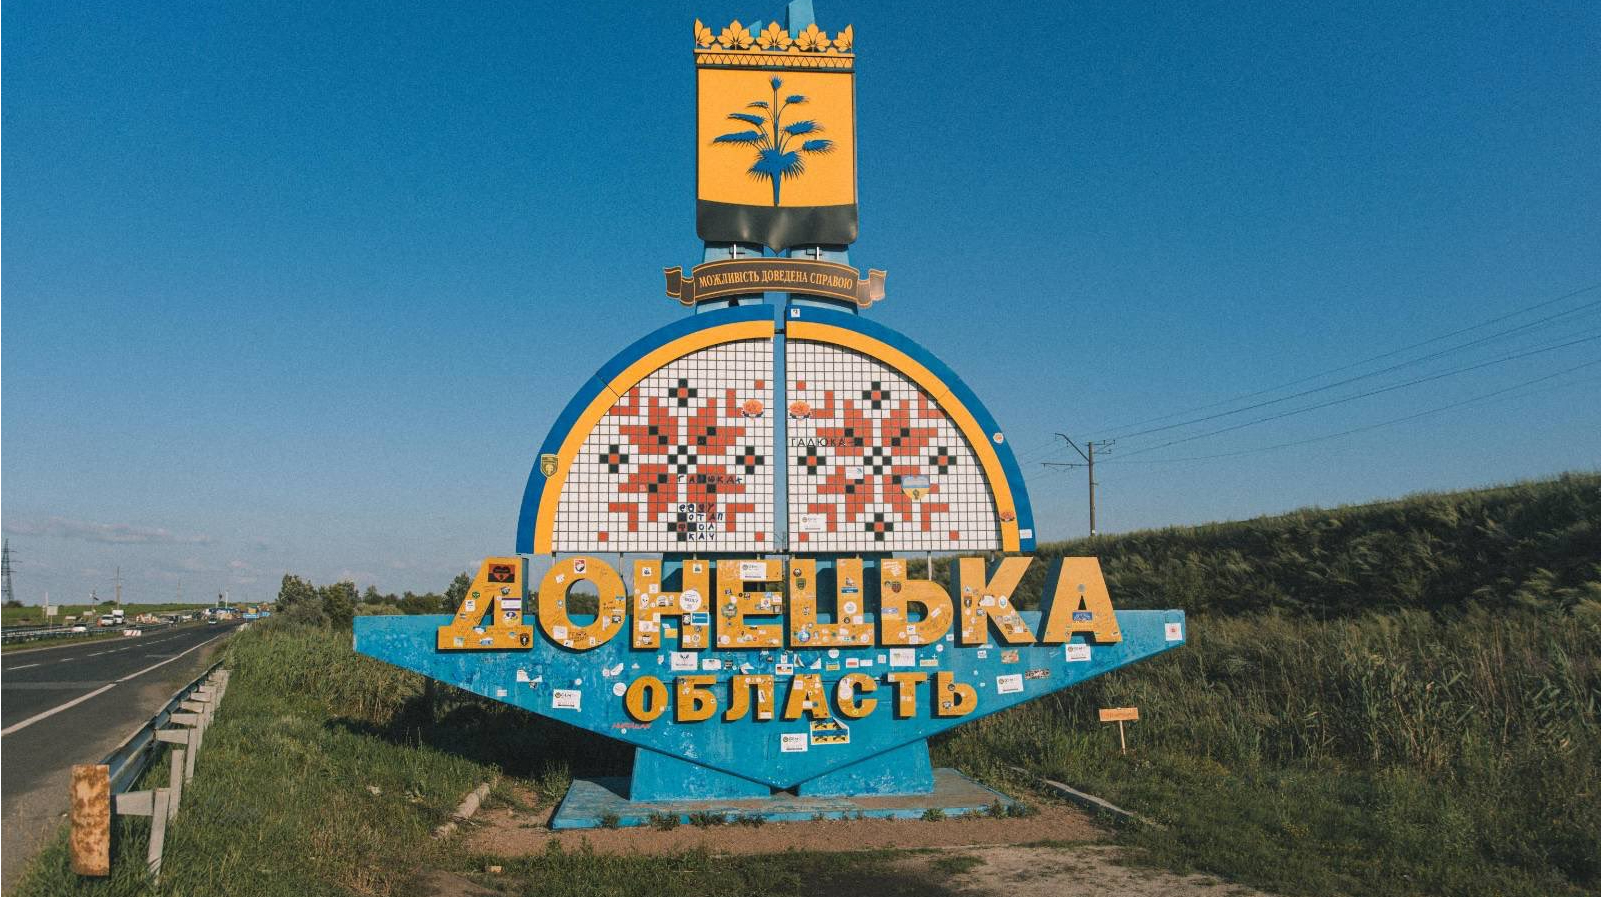 the military is outraged by the renewal of the stele at the entrance to Donetsk region